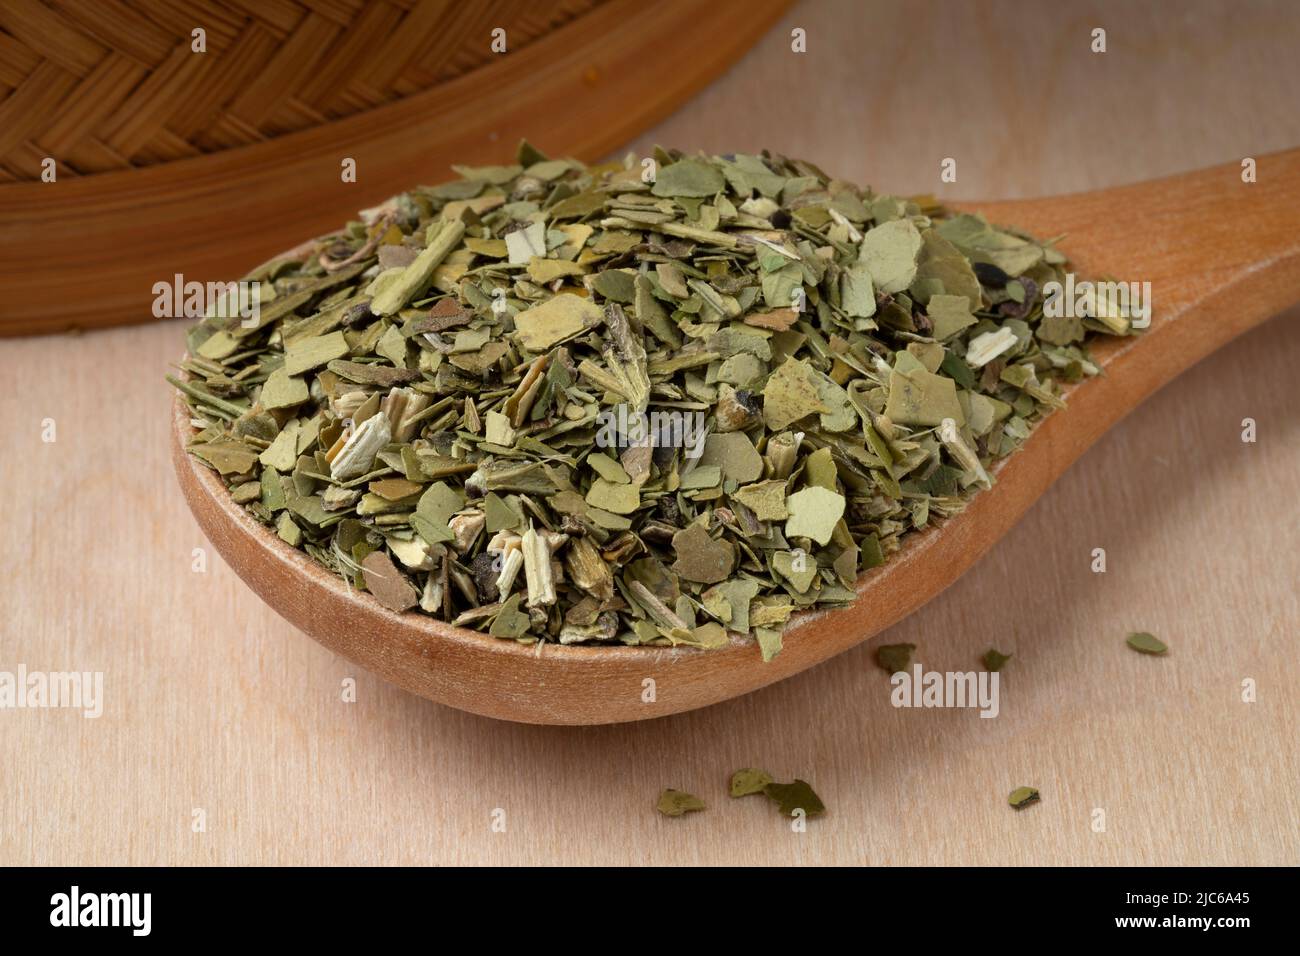 Wooden spoon with dried  traditional South American caffeine rich  Mate tea leaves close up Stock Photo